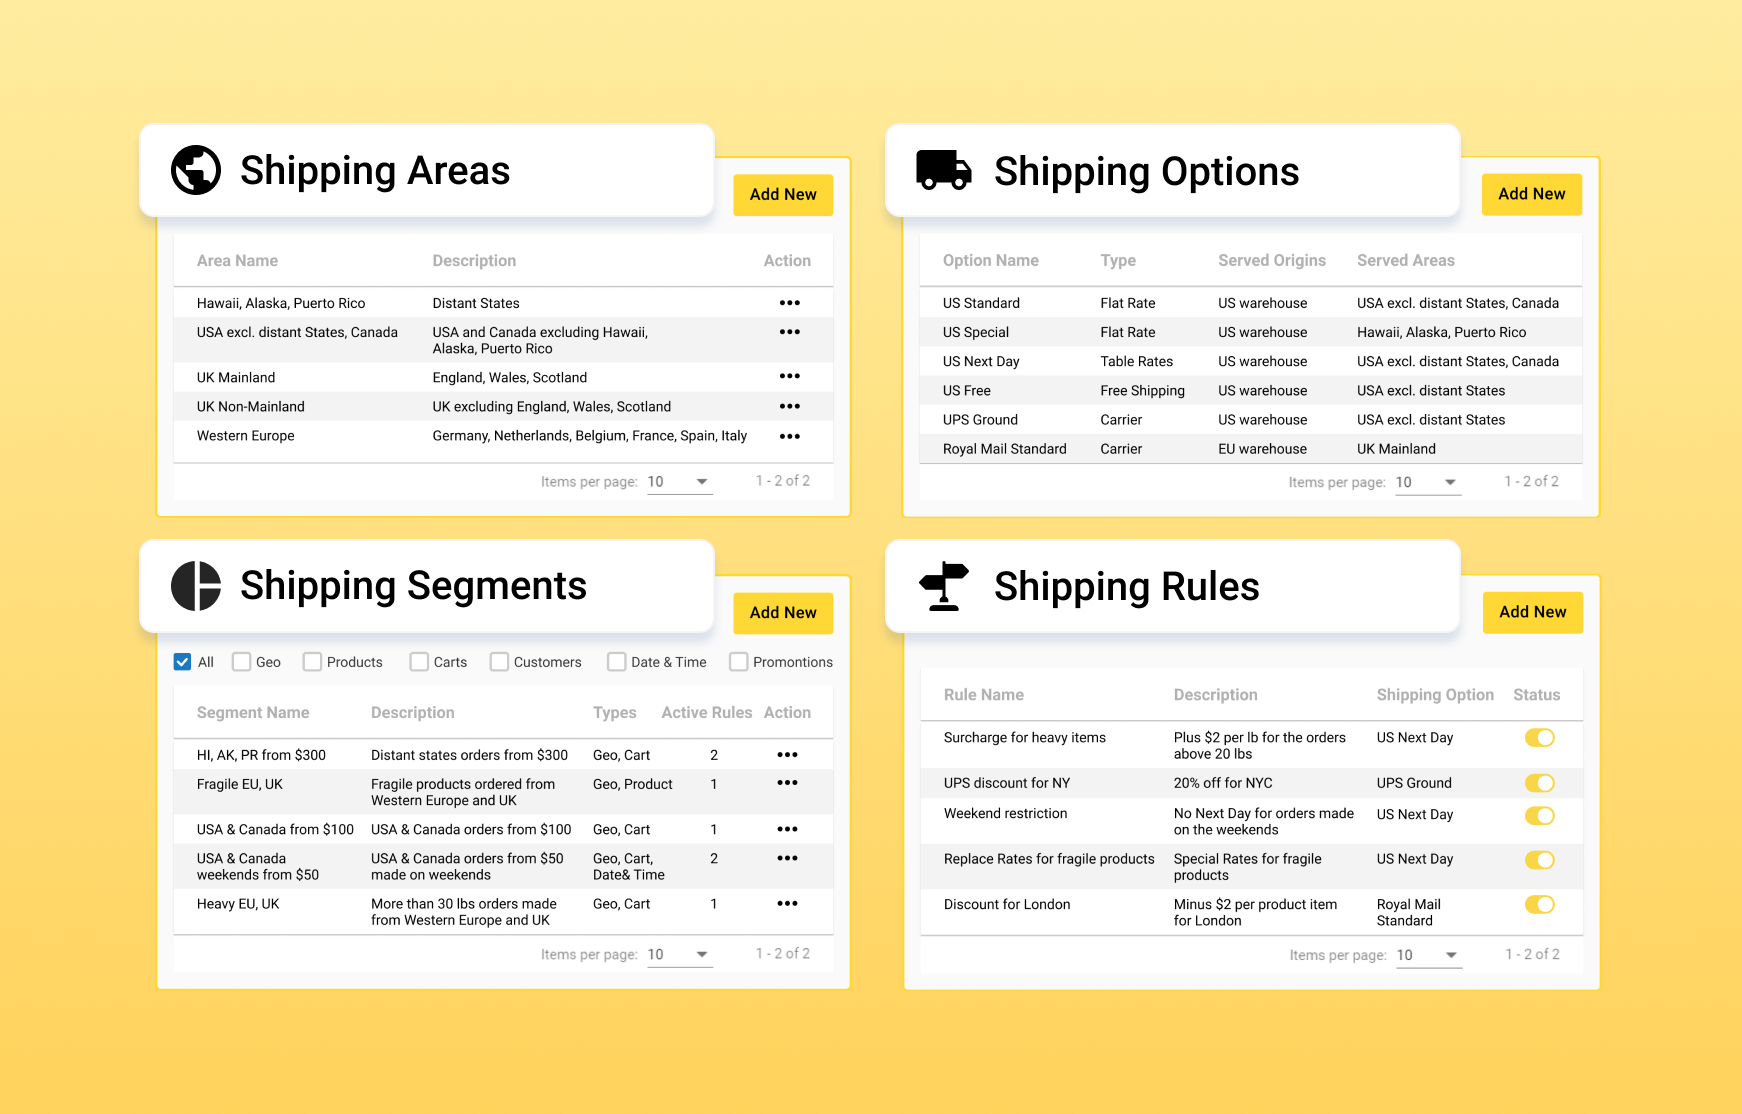 Add shipping options, segments, areas and rules